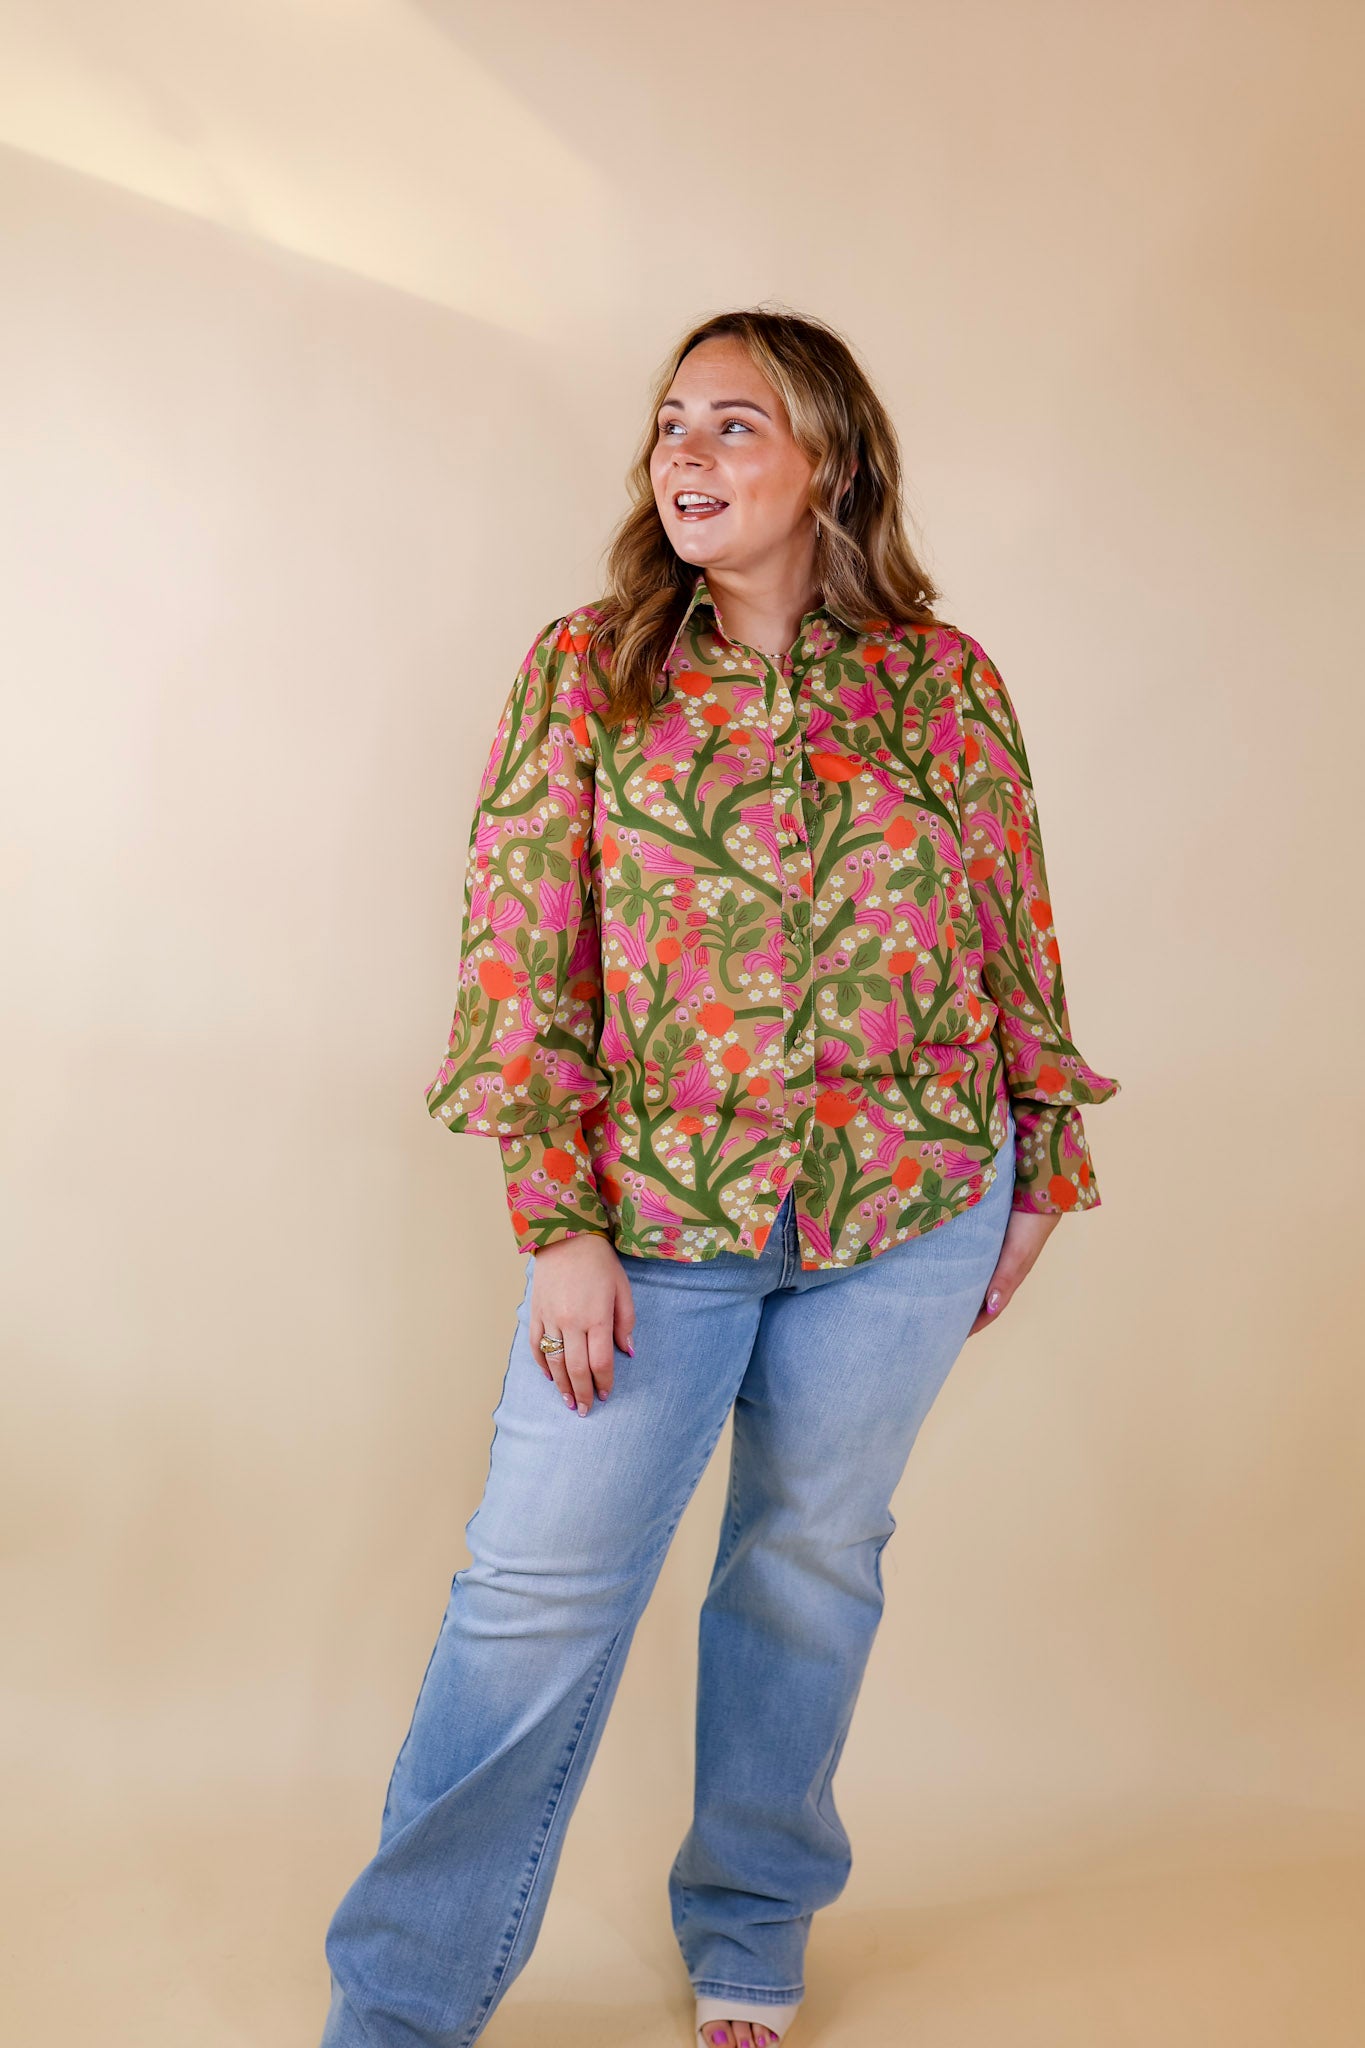 Upbeat Feels Floral Button Up Top with Long Sleeves in Green Mix - Giddy Up Glamour Boutique